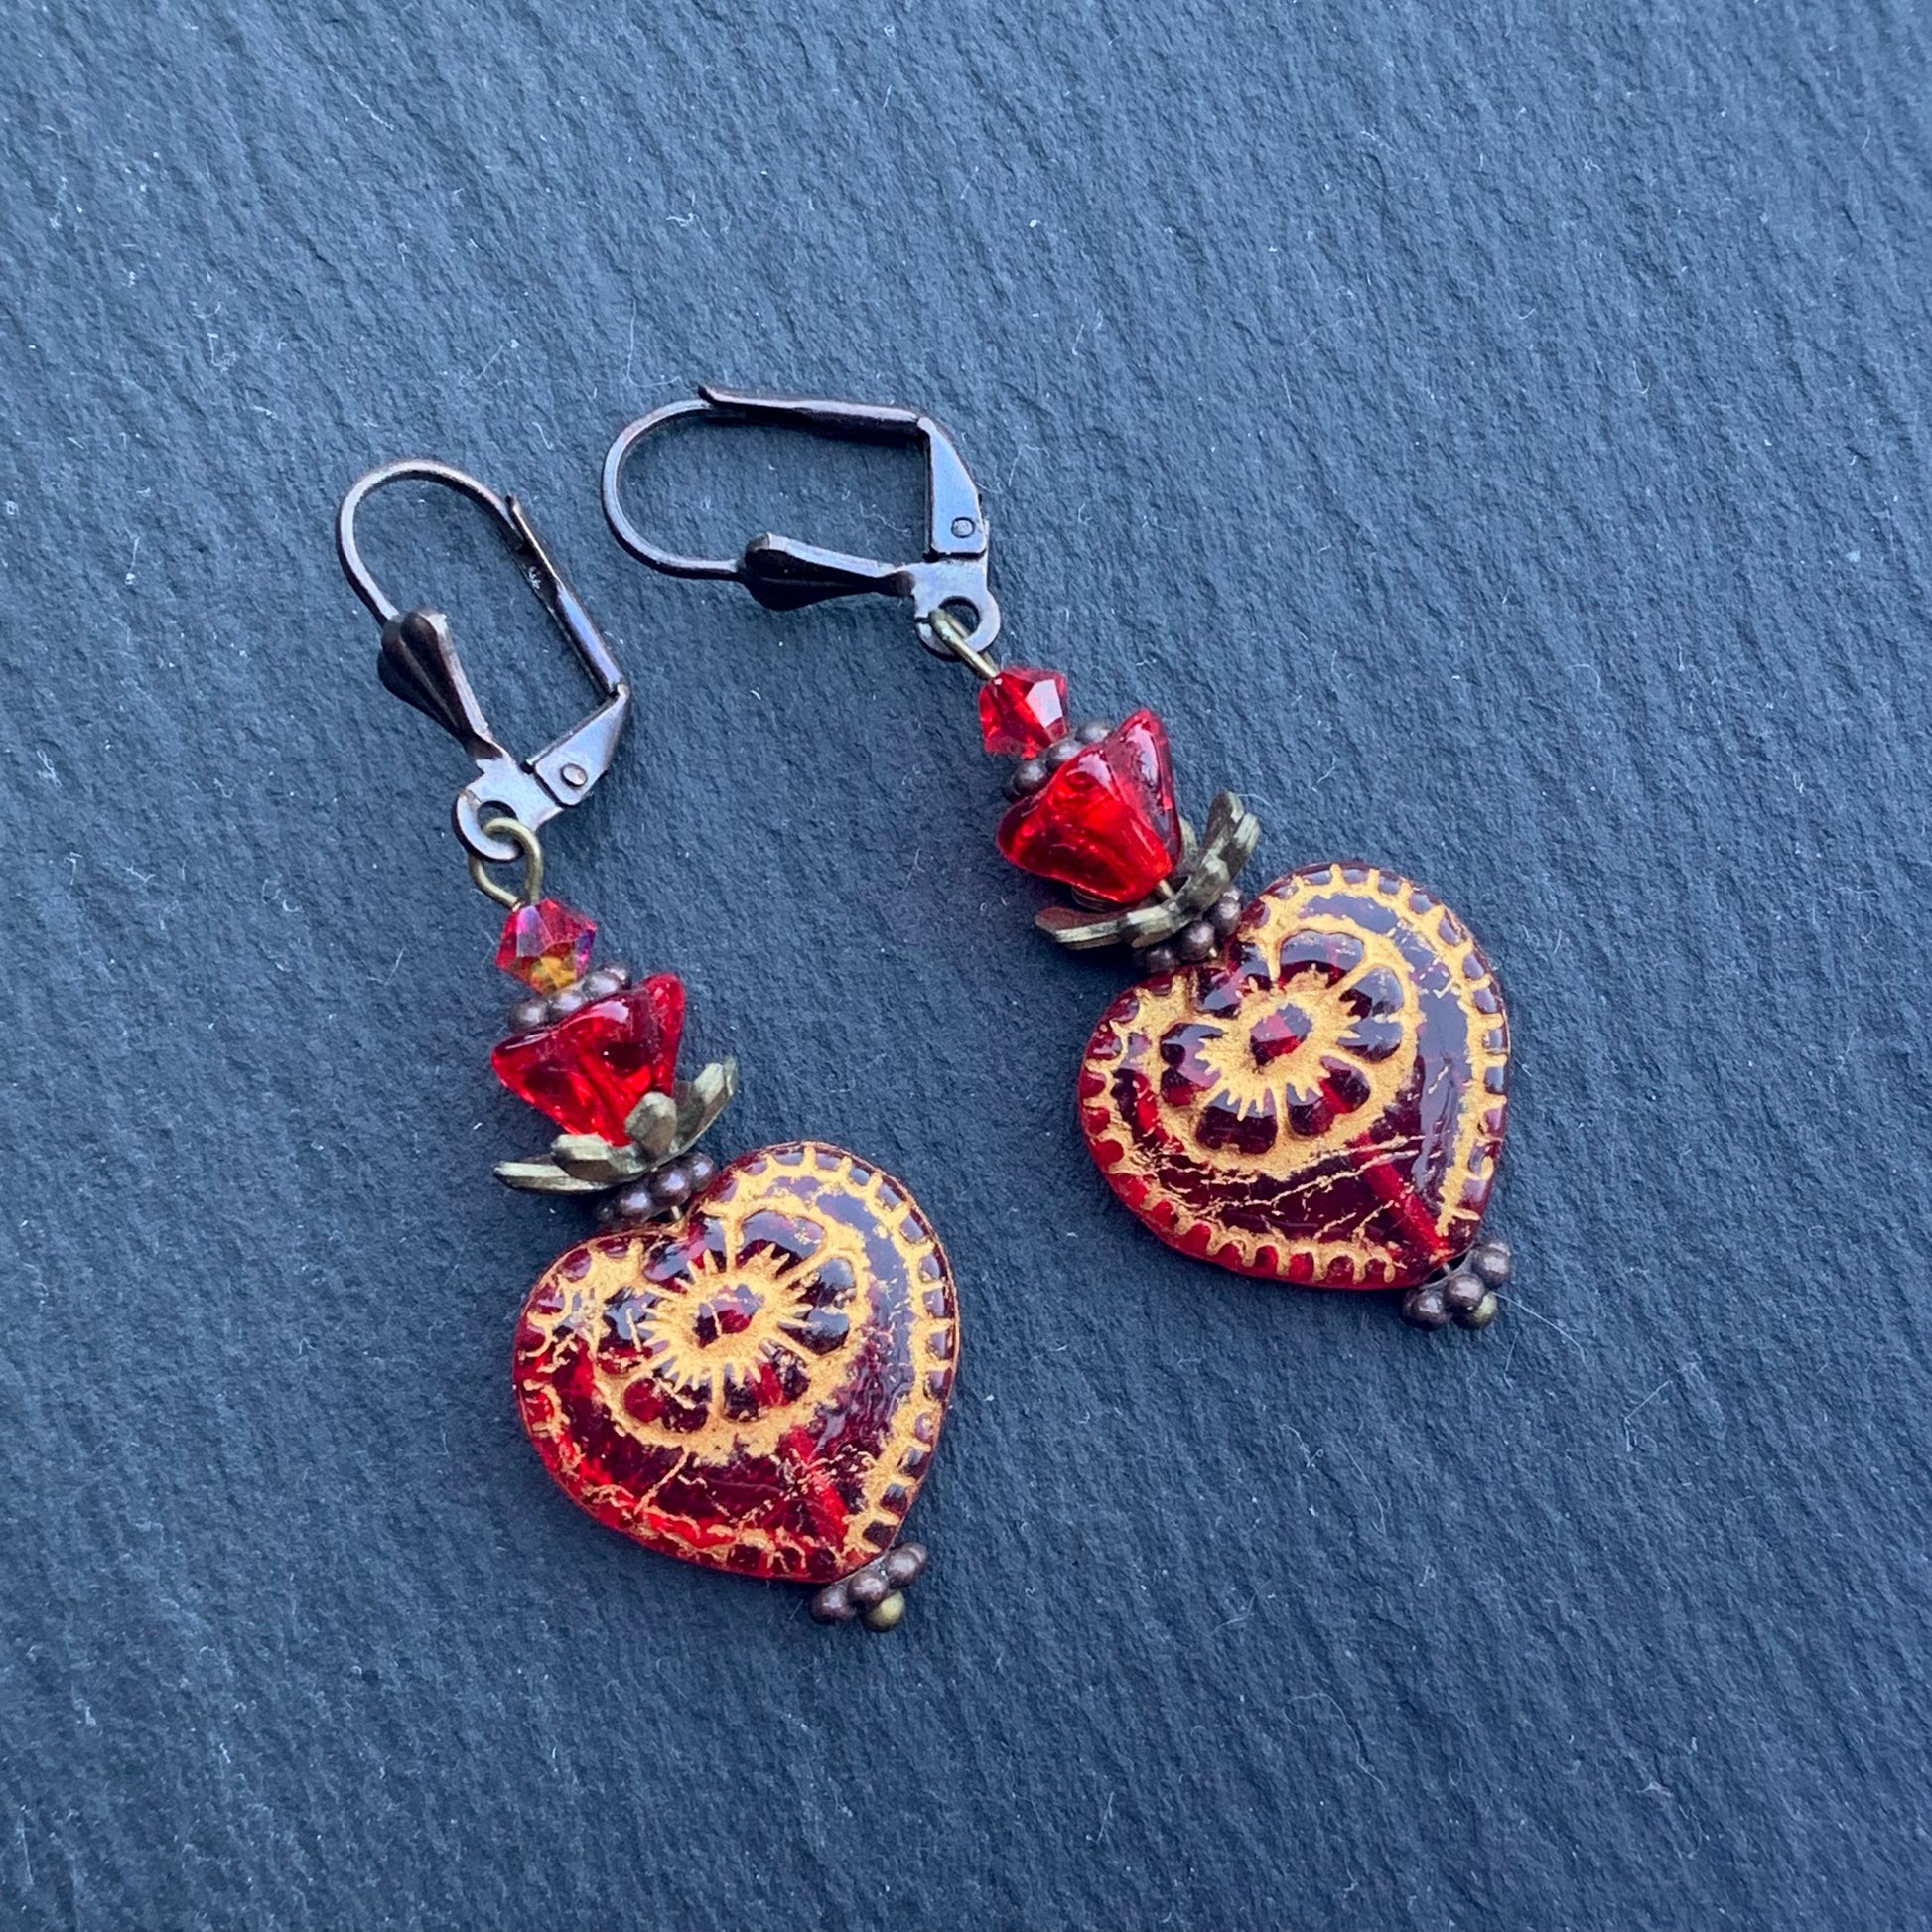 Victorian Valentine Earrings With Red Glass Hearts And Flowers In Antiqued Bronze. Niobium Ear-wire Option - Darkmoon Fayre